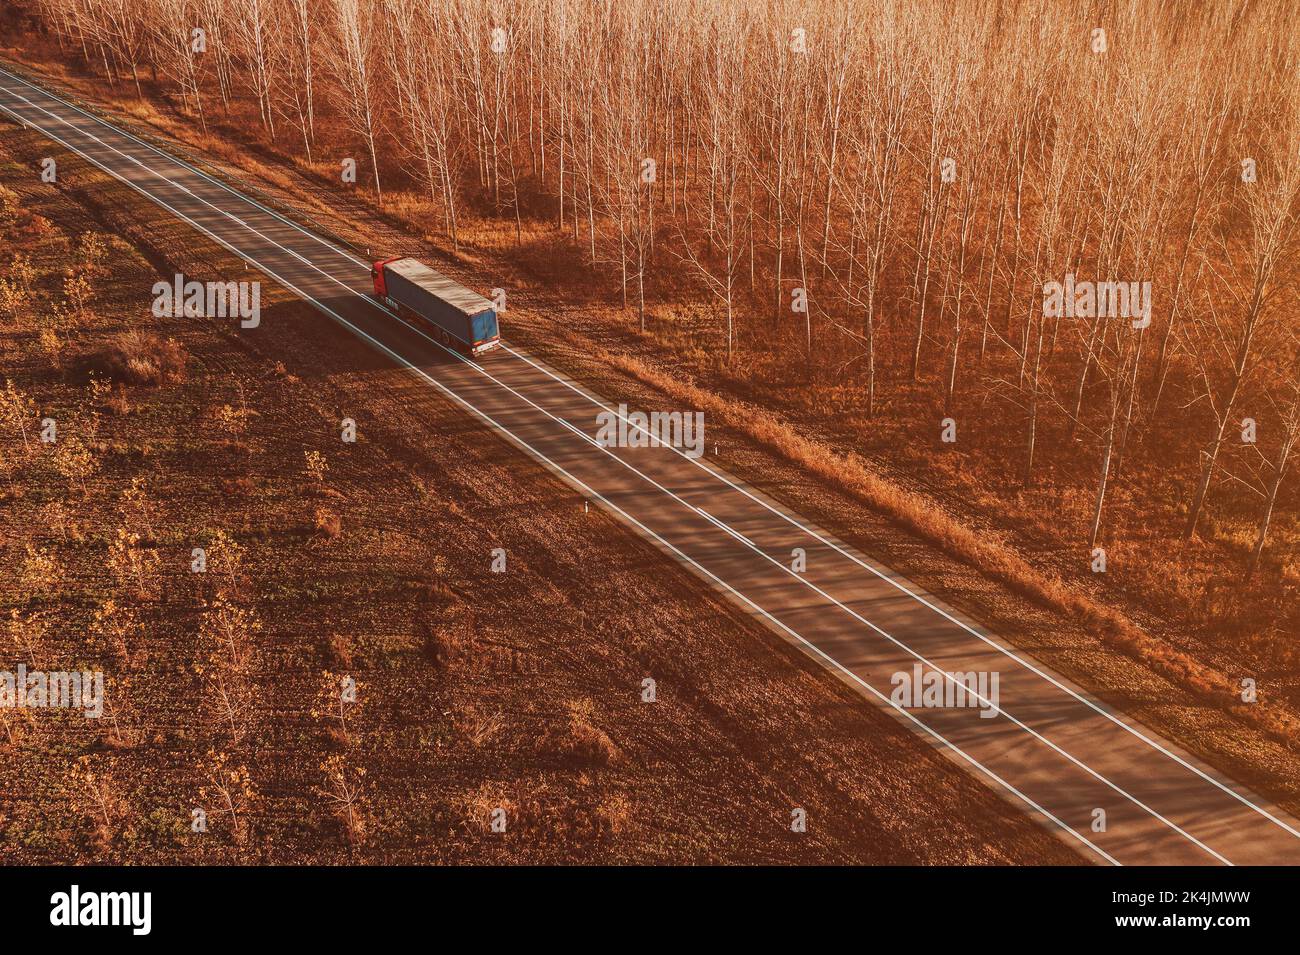 Semitrailer eighteen-wheeler truck on the road through deciduous forest landscape in autumn sunset, drone photography from above Stock Photo